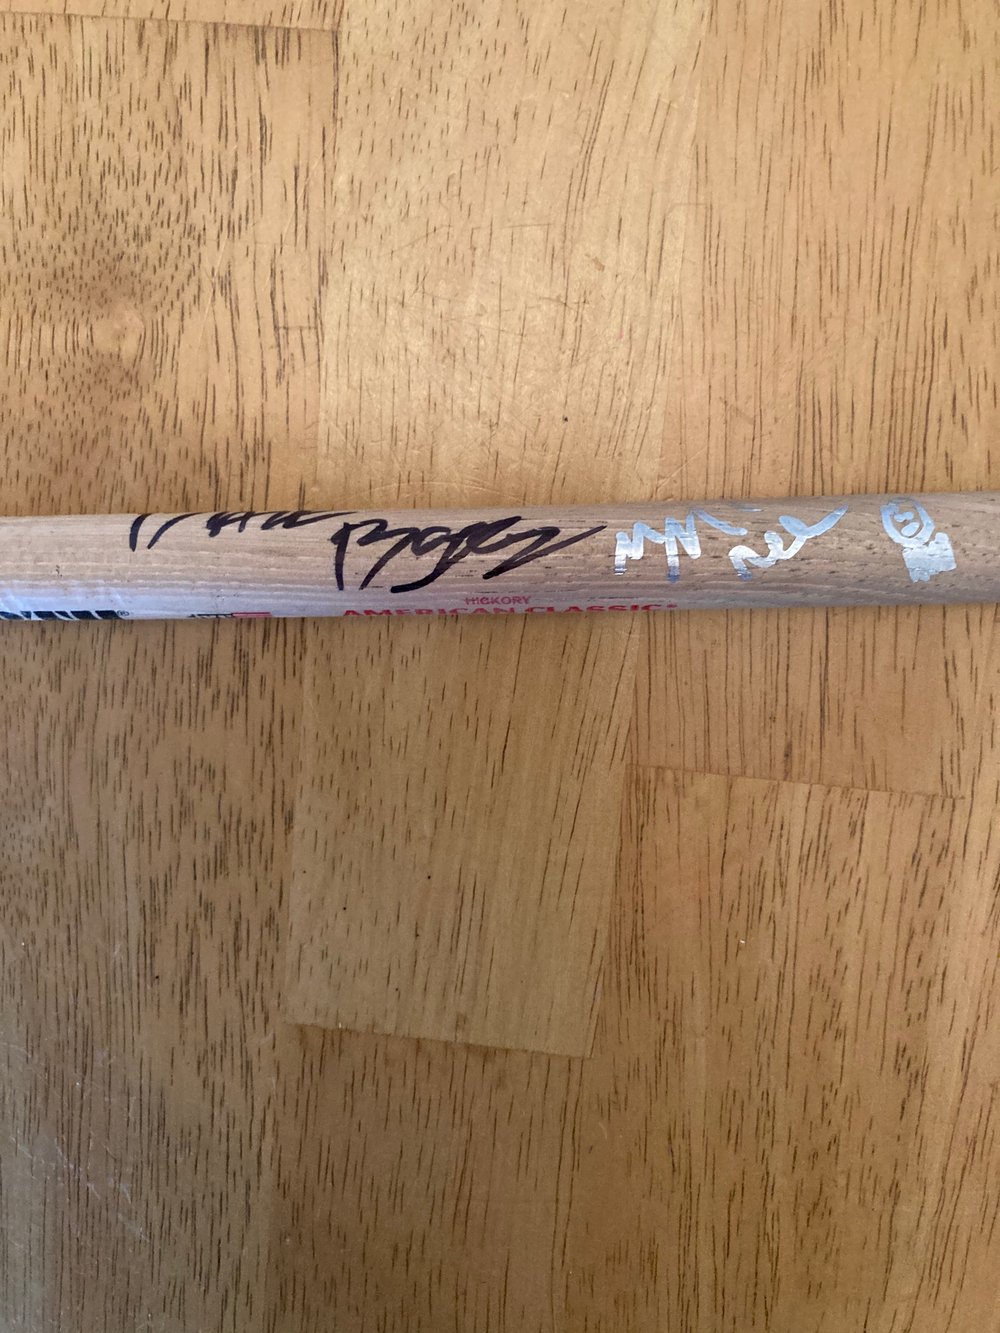 Signed Drum stick used by Martin 